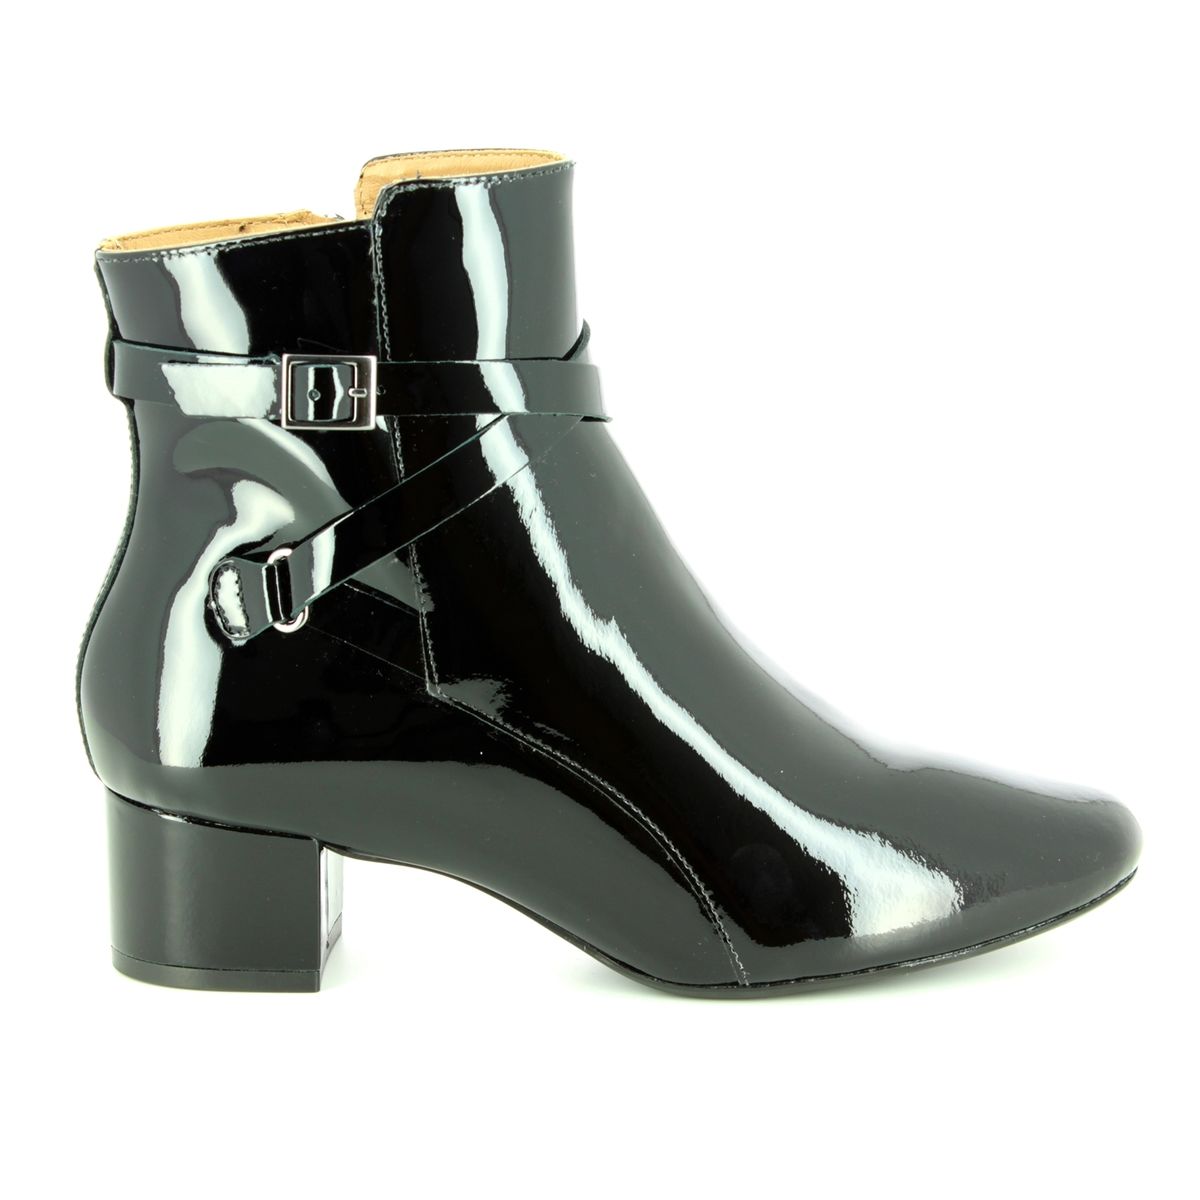 Begg Shoes Eclipsed 11204-40 Black patent ankle boots